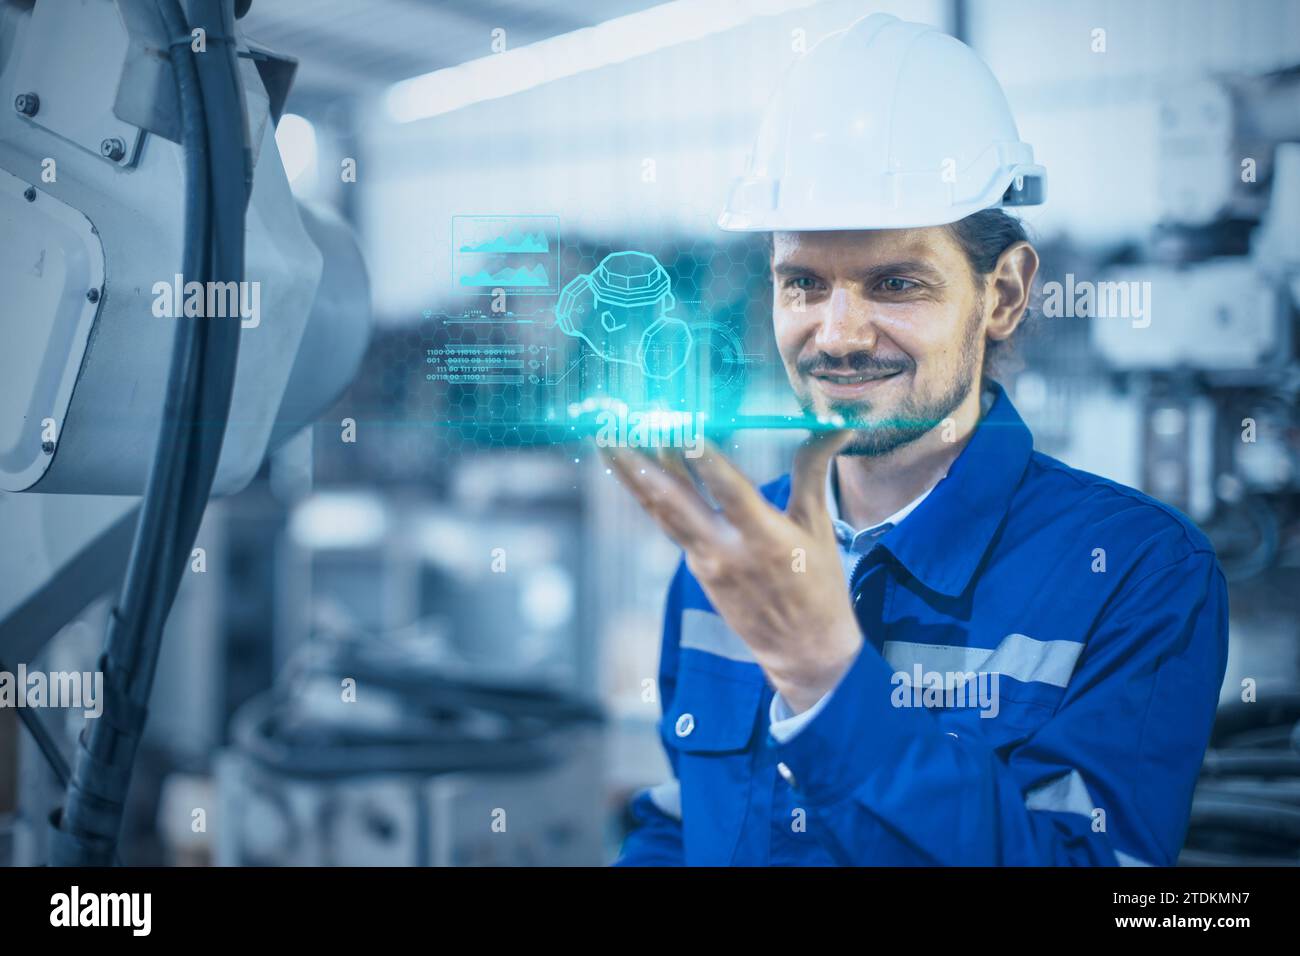 Engineer male exciting with modern hologram display device showing engineering product model information detail using laser holographic 3d technology. Stock Photo